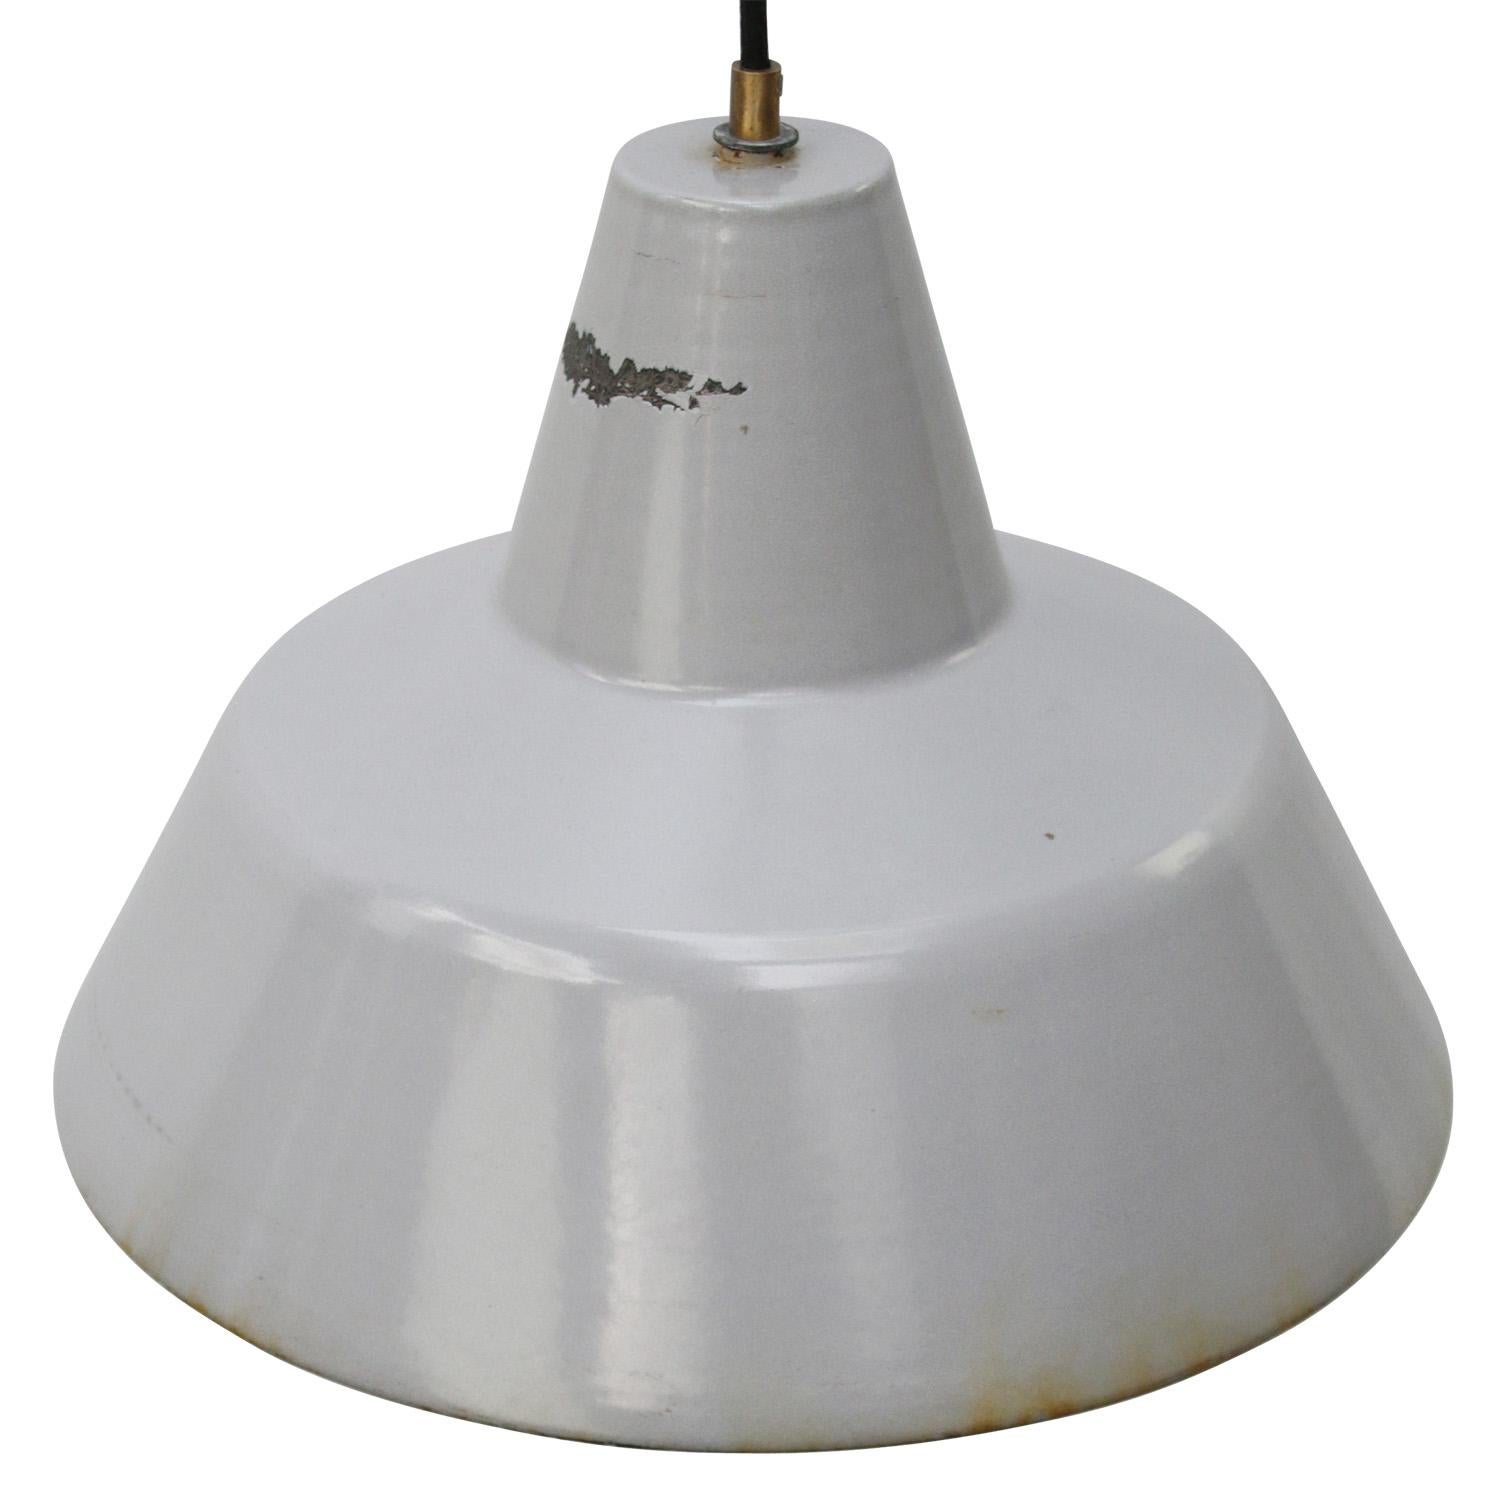 Dutch industrial hanging lamp by Philips
Grey enamel white interior

Weight: 2.00 kg / 4.4 lb

Priced per individual item. All lamps have been made suitable by international standards for incandescent light bulbs, energy-efficient and LED